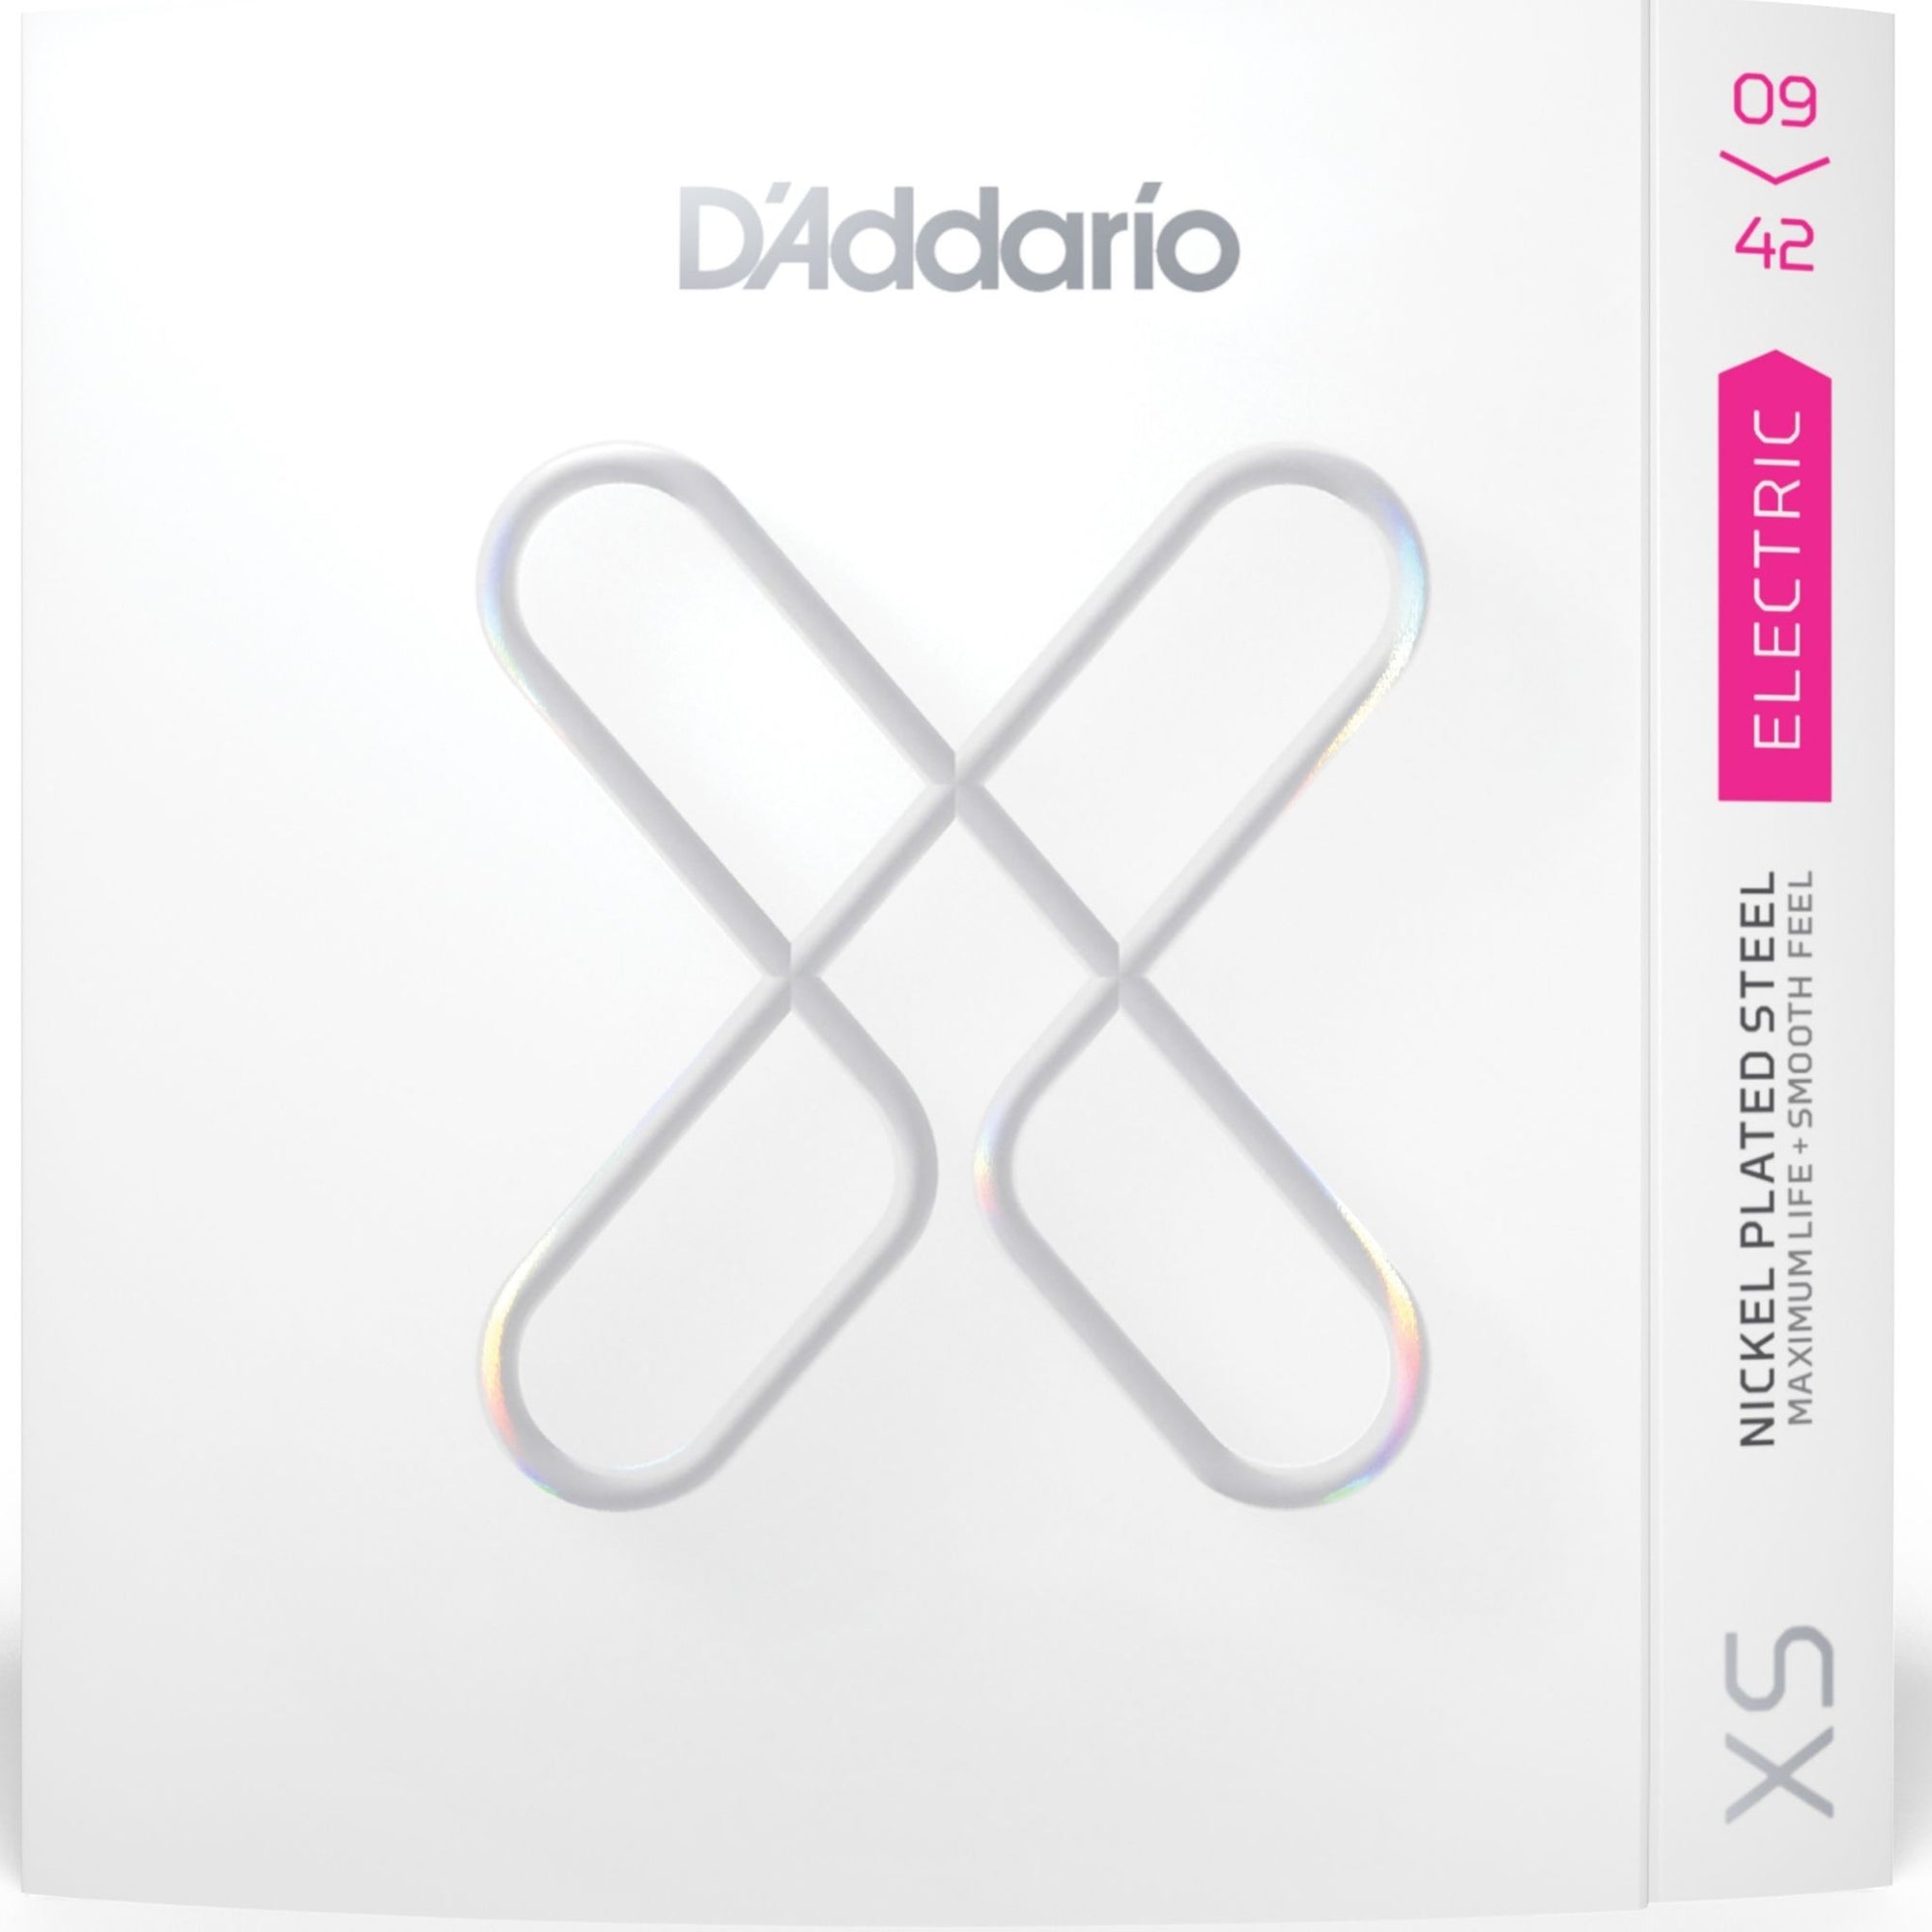 D'Addario XSE0942 Coated Nickel-plated Steel Super Light Electric Guitar Strings 9-42 Package Front